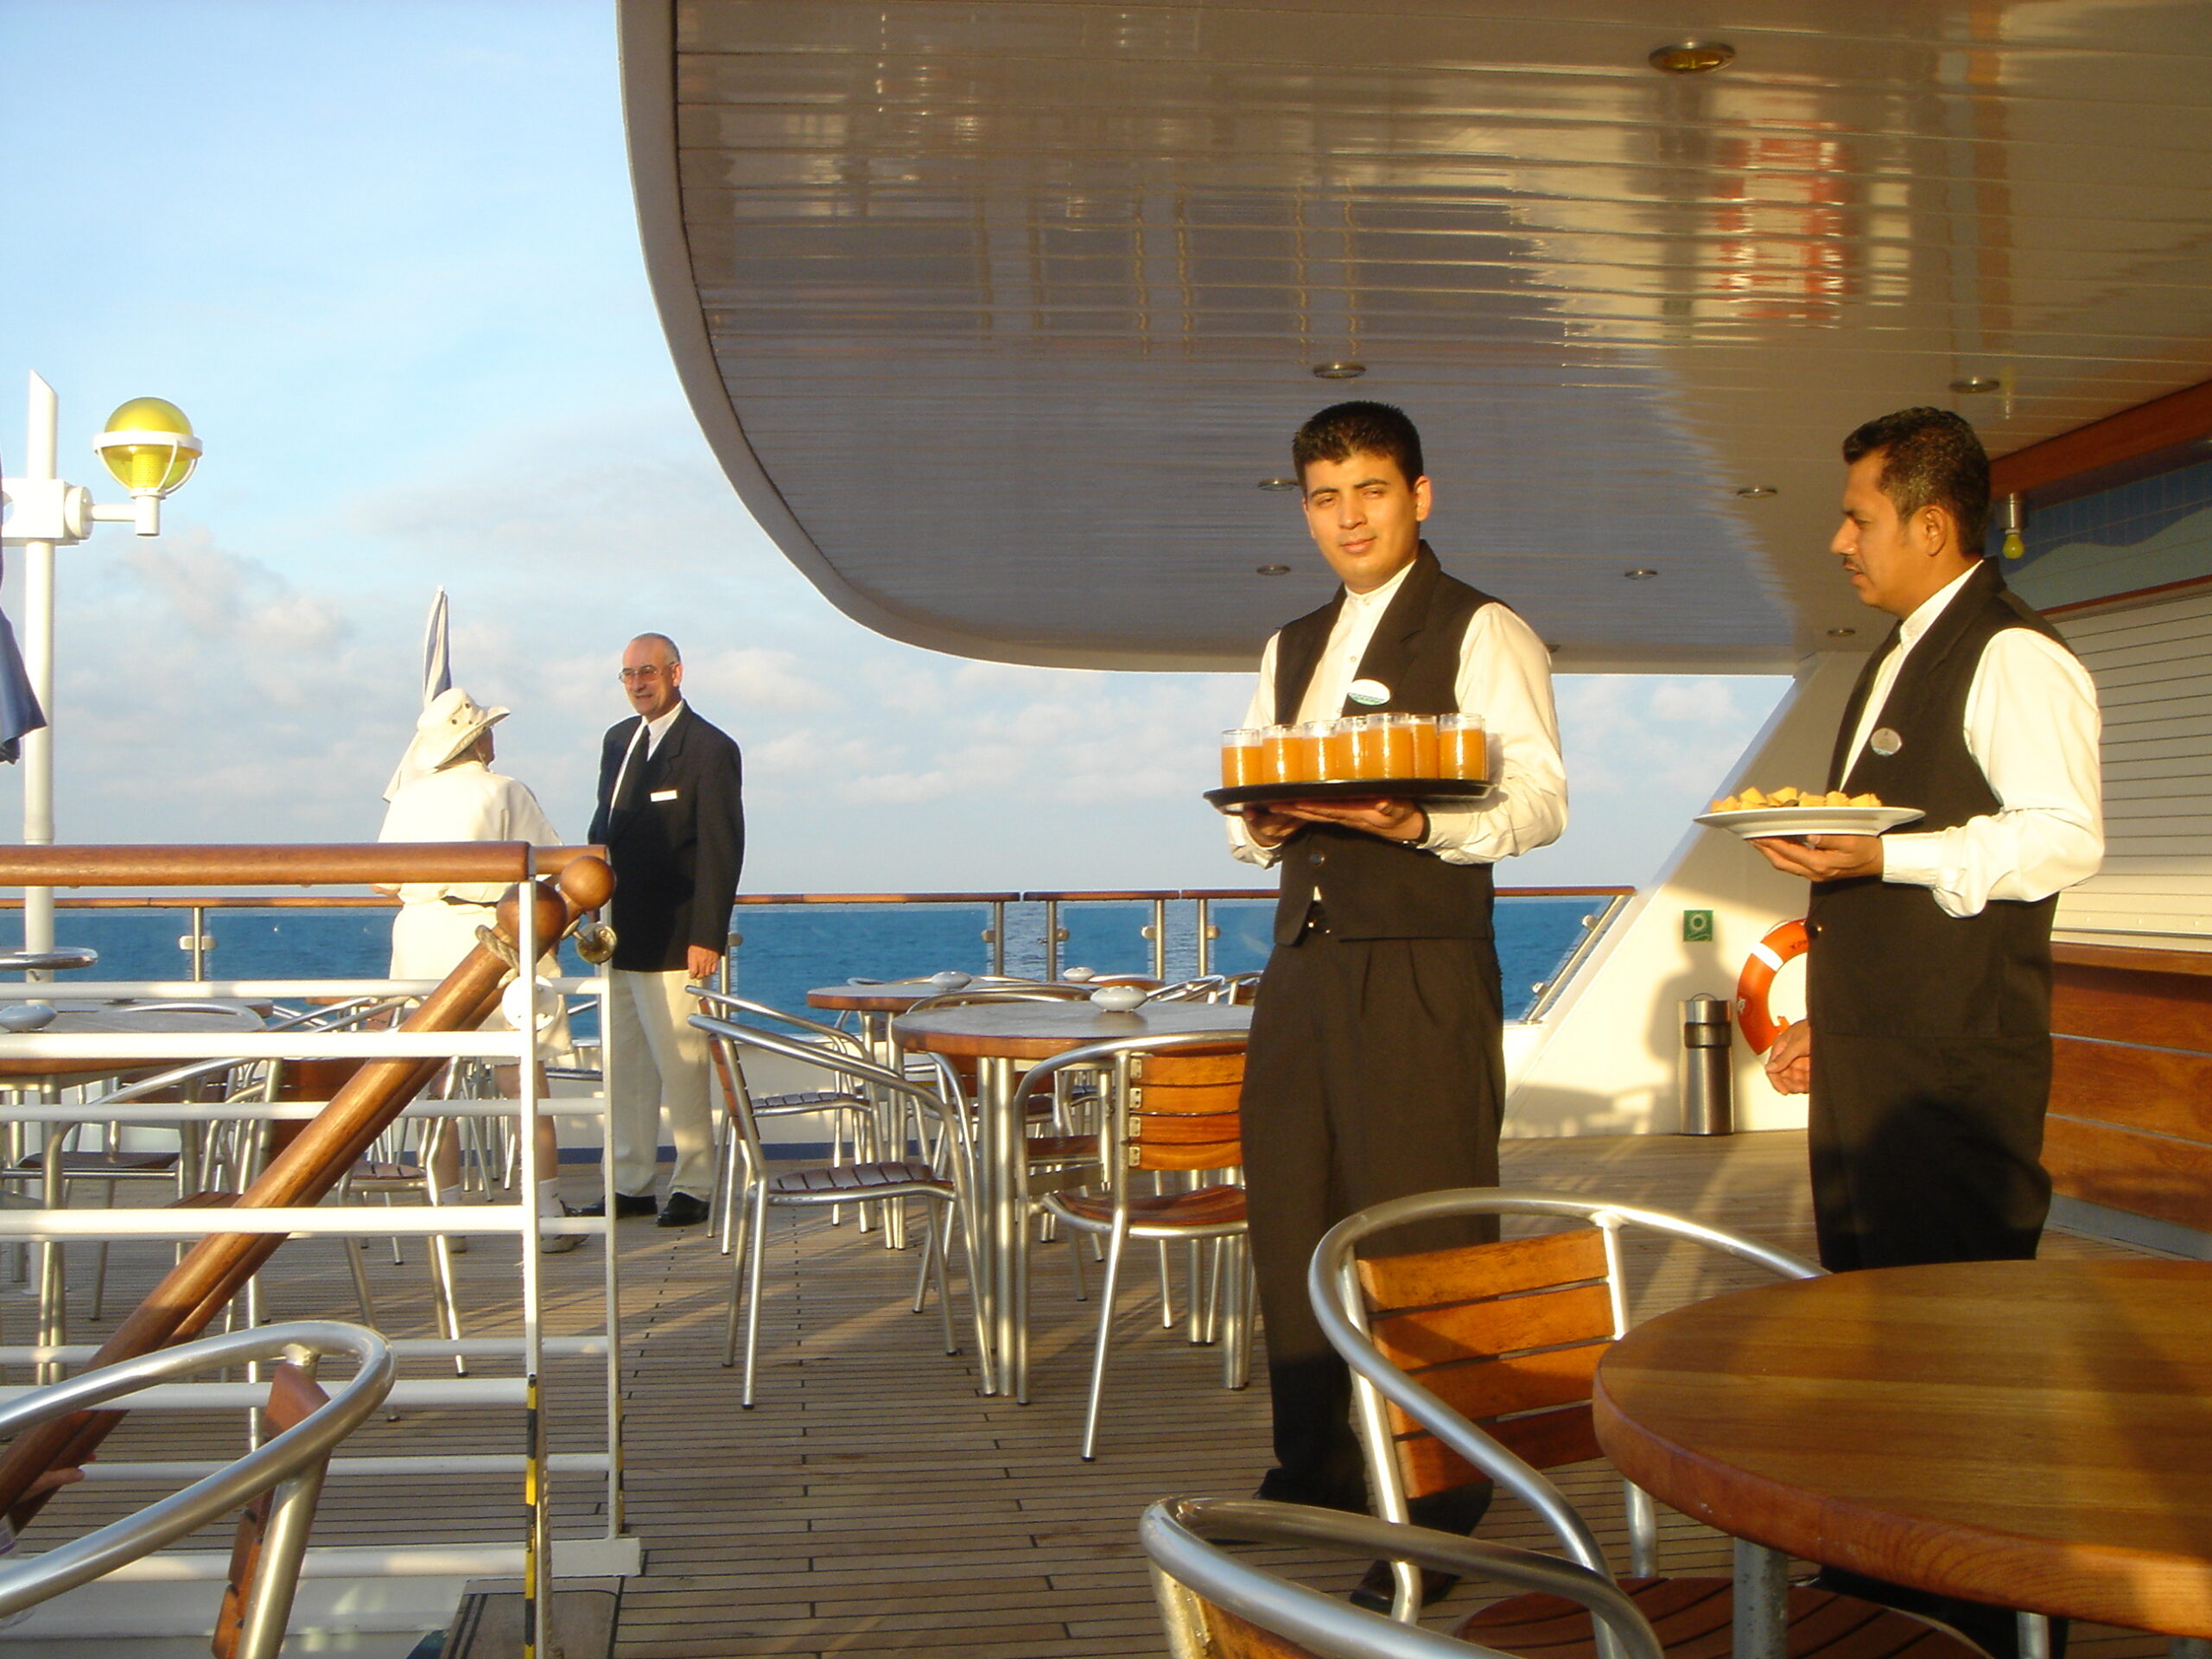 Ship waiters with drinks and food